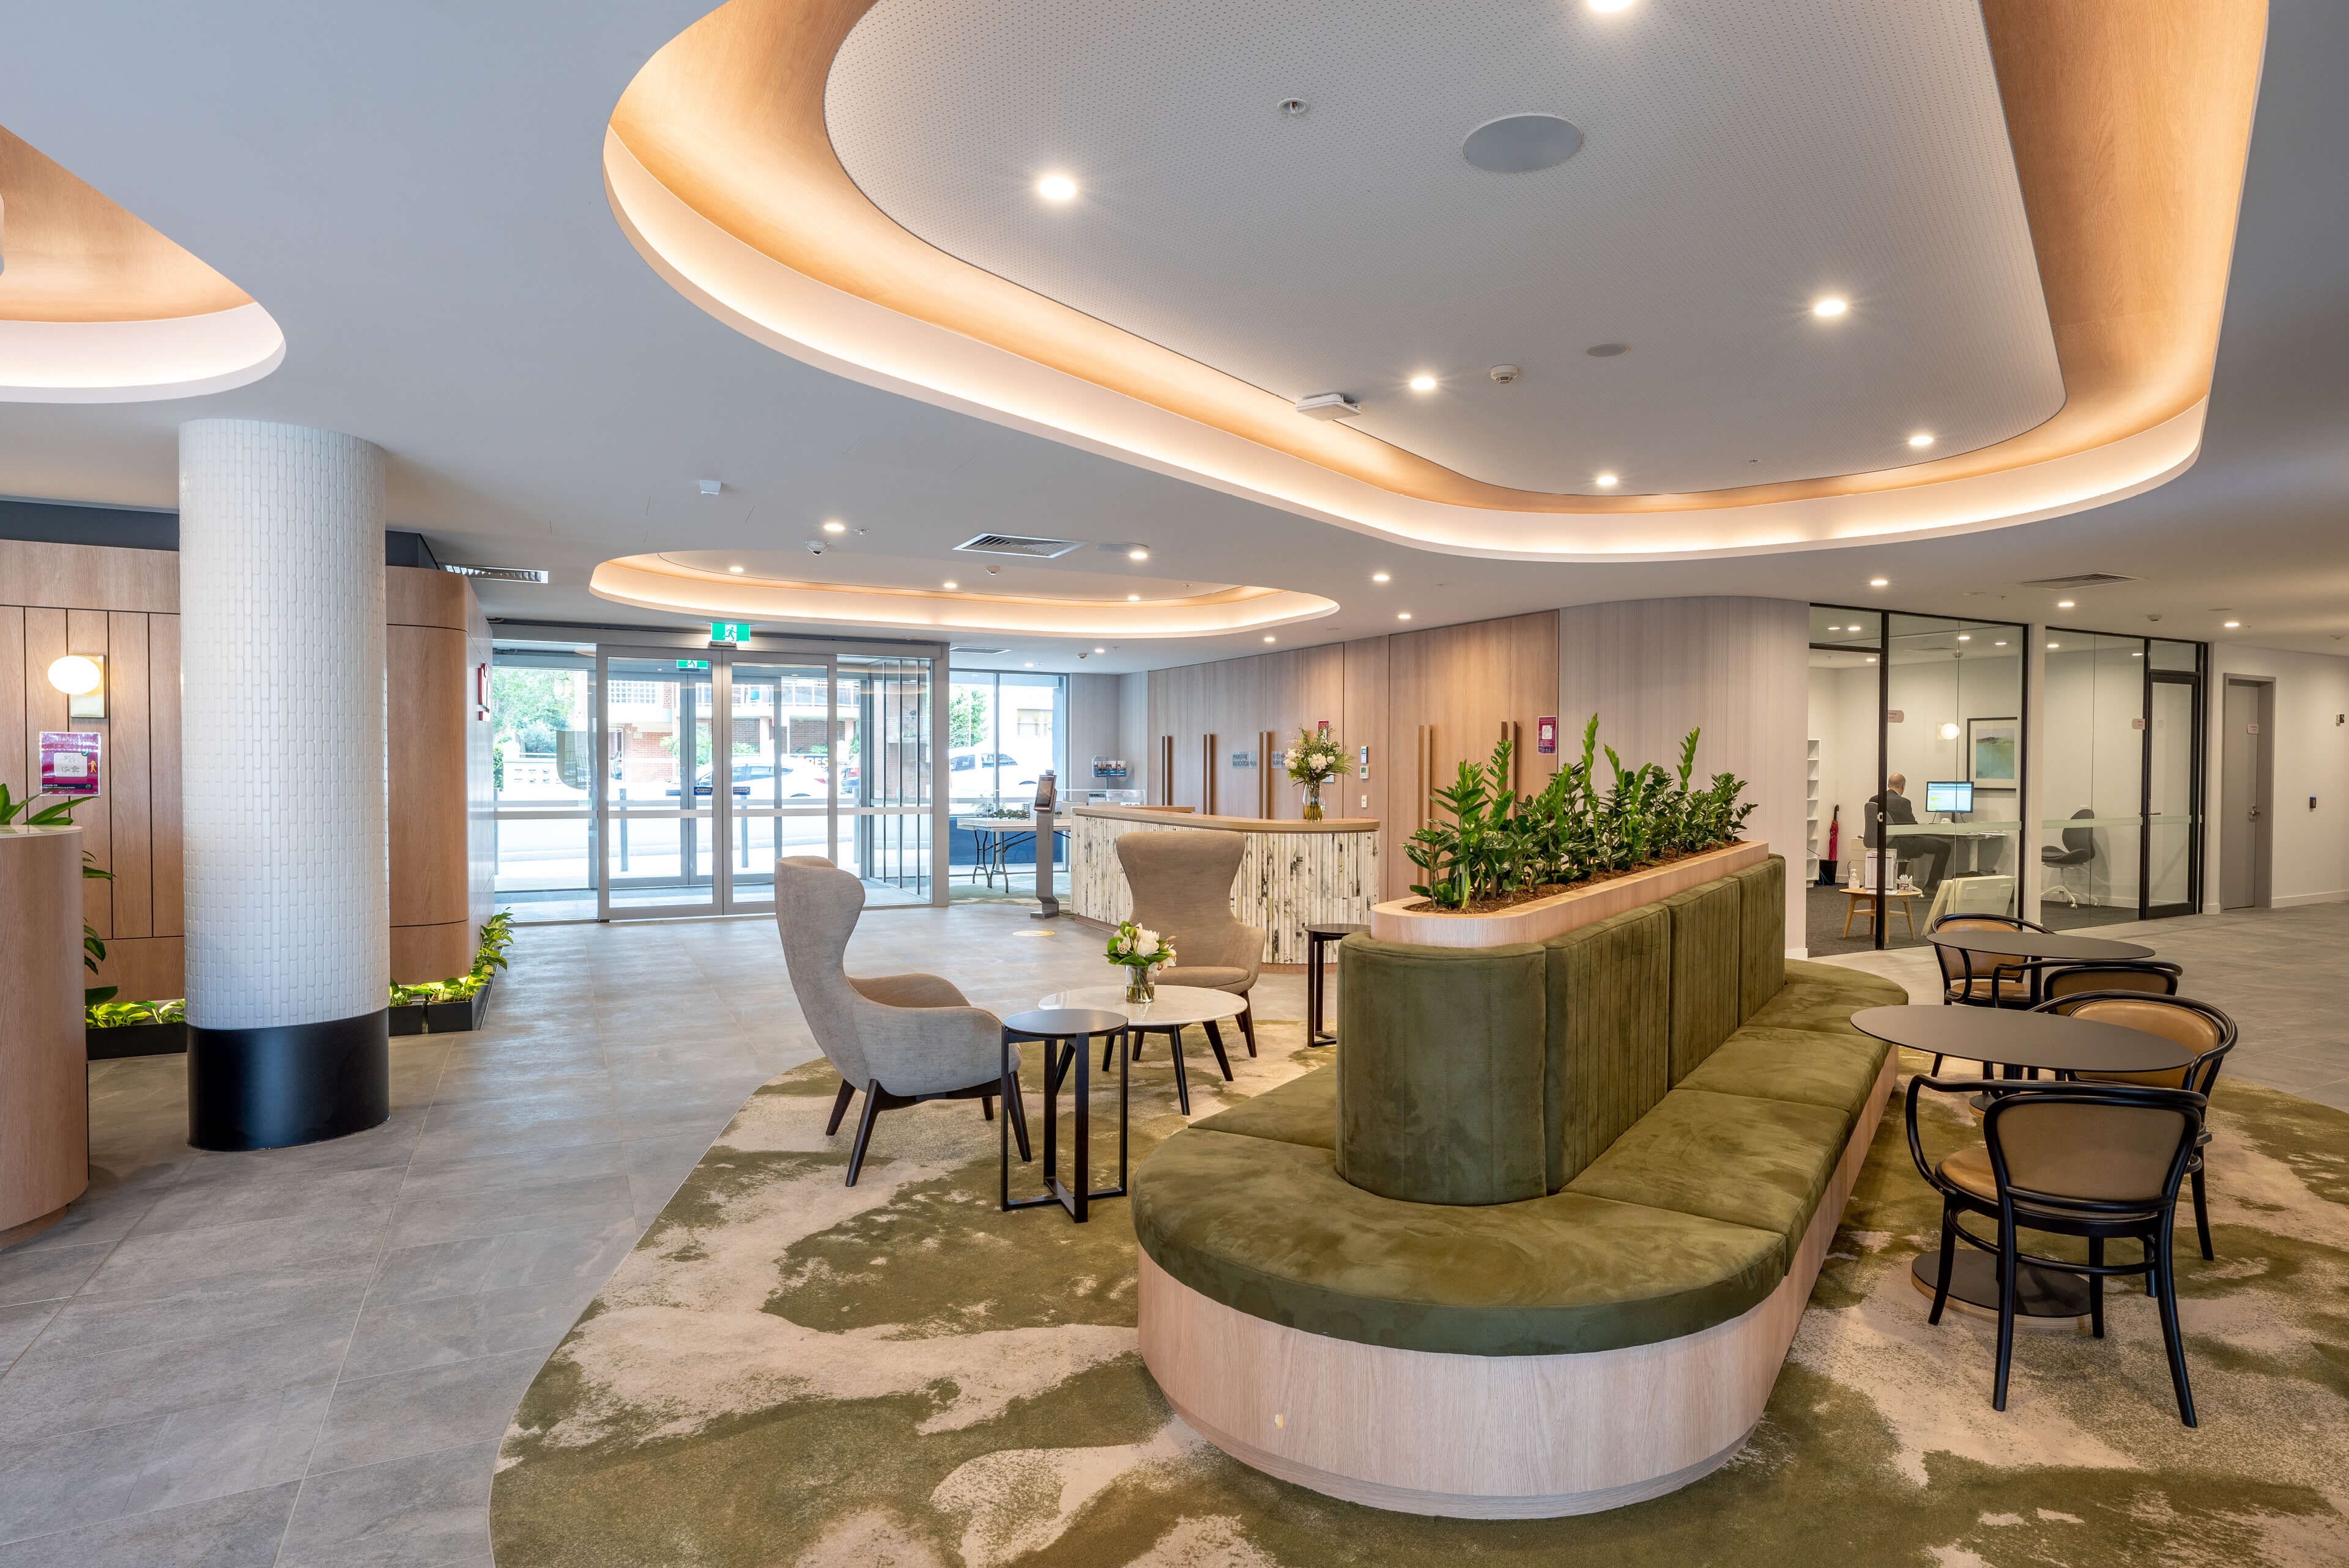 11 uniting main entry and reception with oval seating feature at uniting mayflower westmead taylor construction aged care